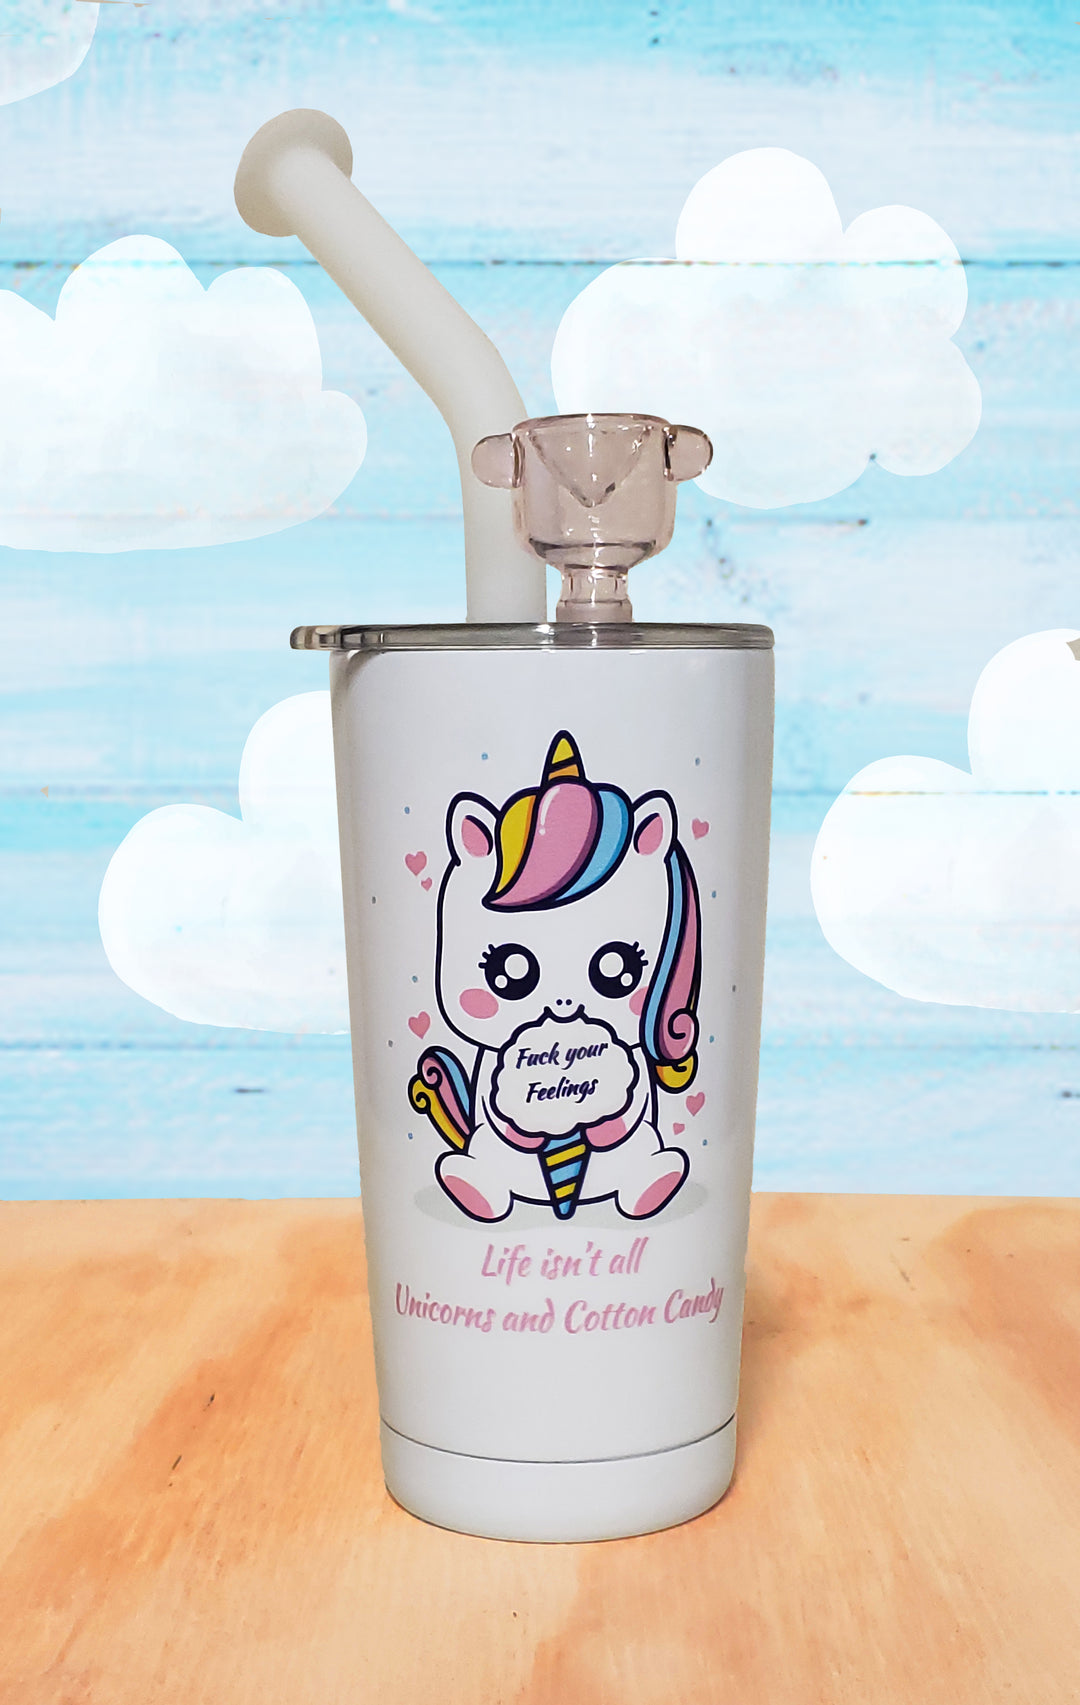 OG 20oz Polar Blast with Unicorn holding cotton candy. With saying "Life isn't all unicorns and cotton candy, Fuck your feelings"